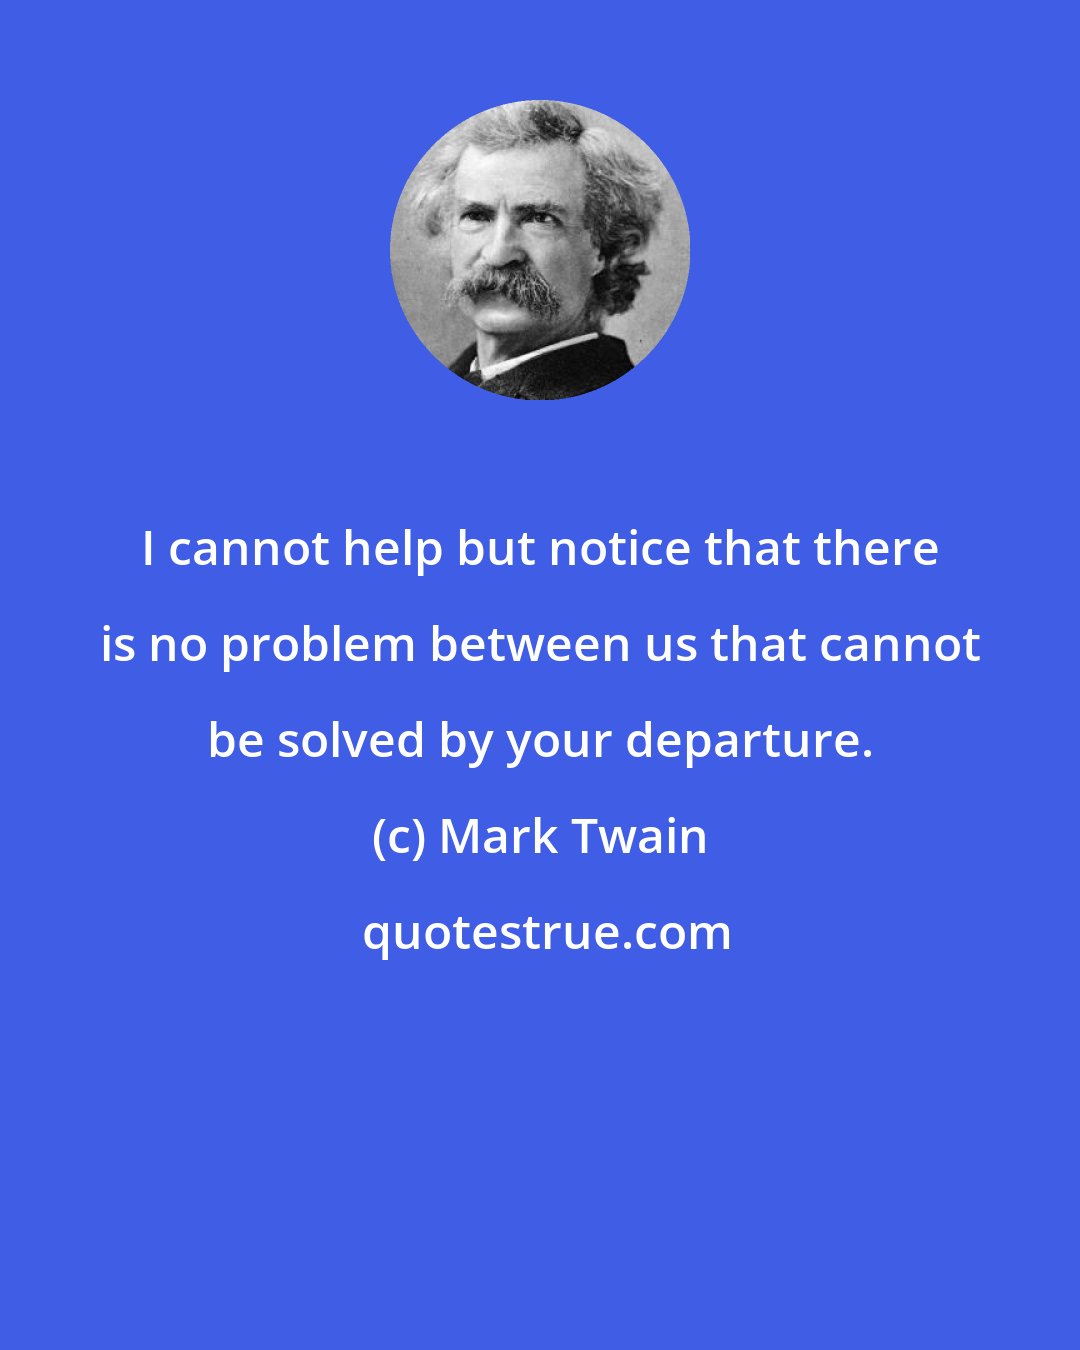 Mark Twain: I cannot help but notice that there is no problem between us that cannot be solved by your departure.